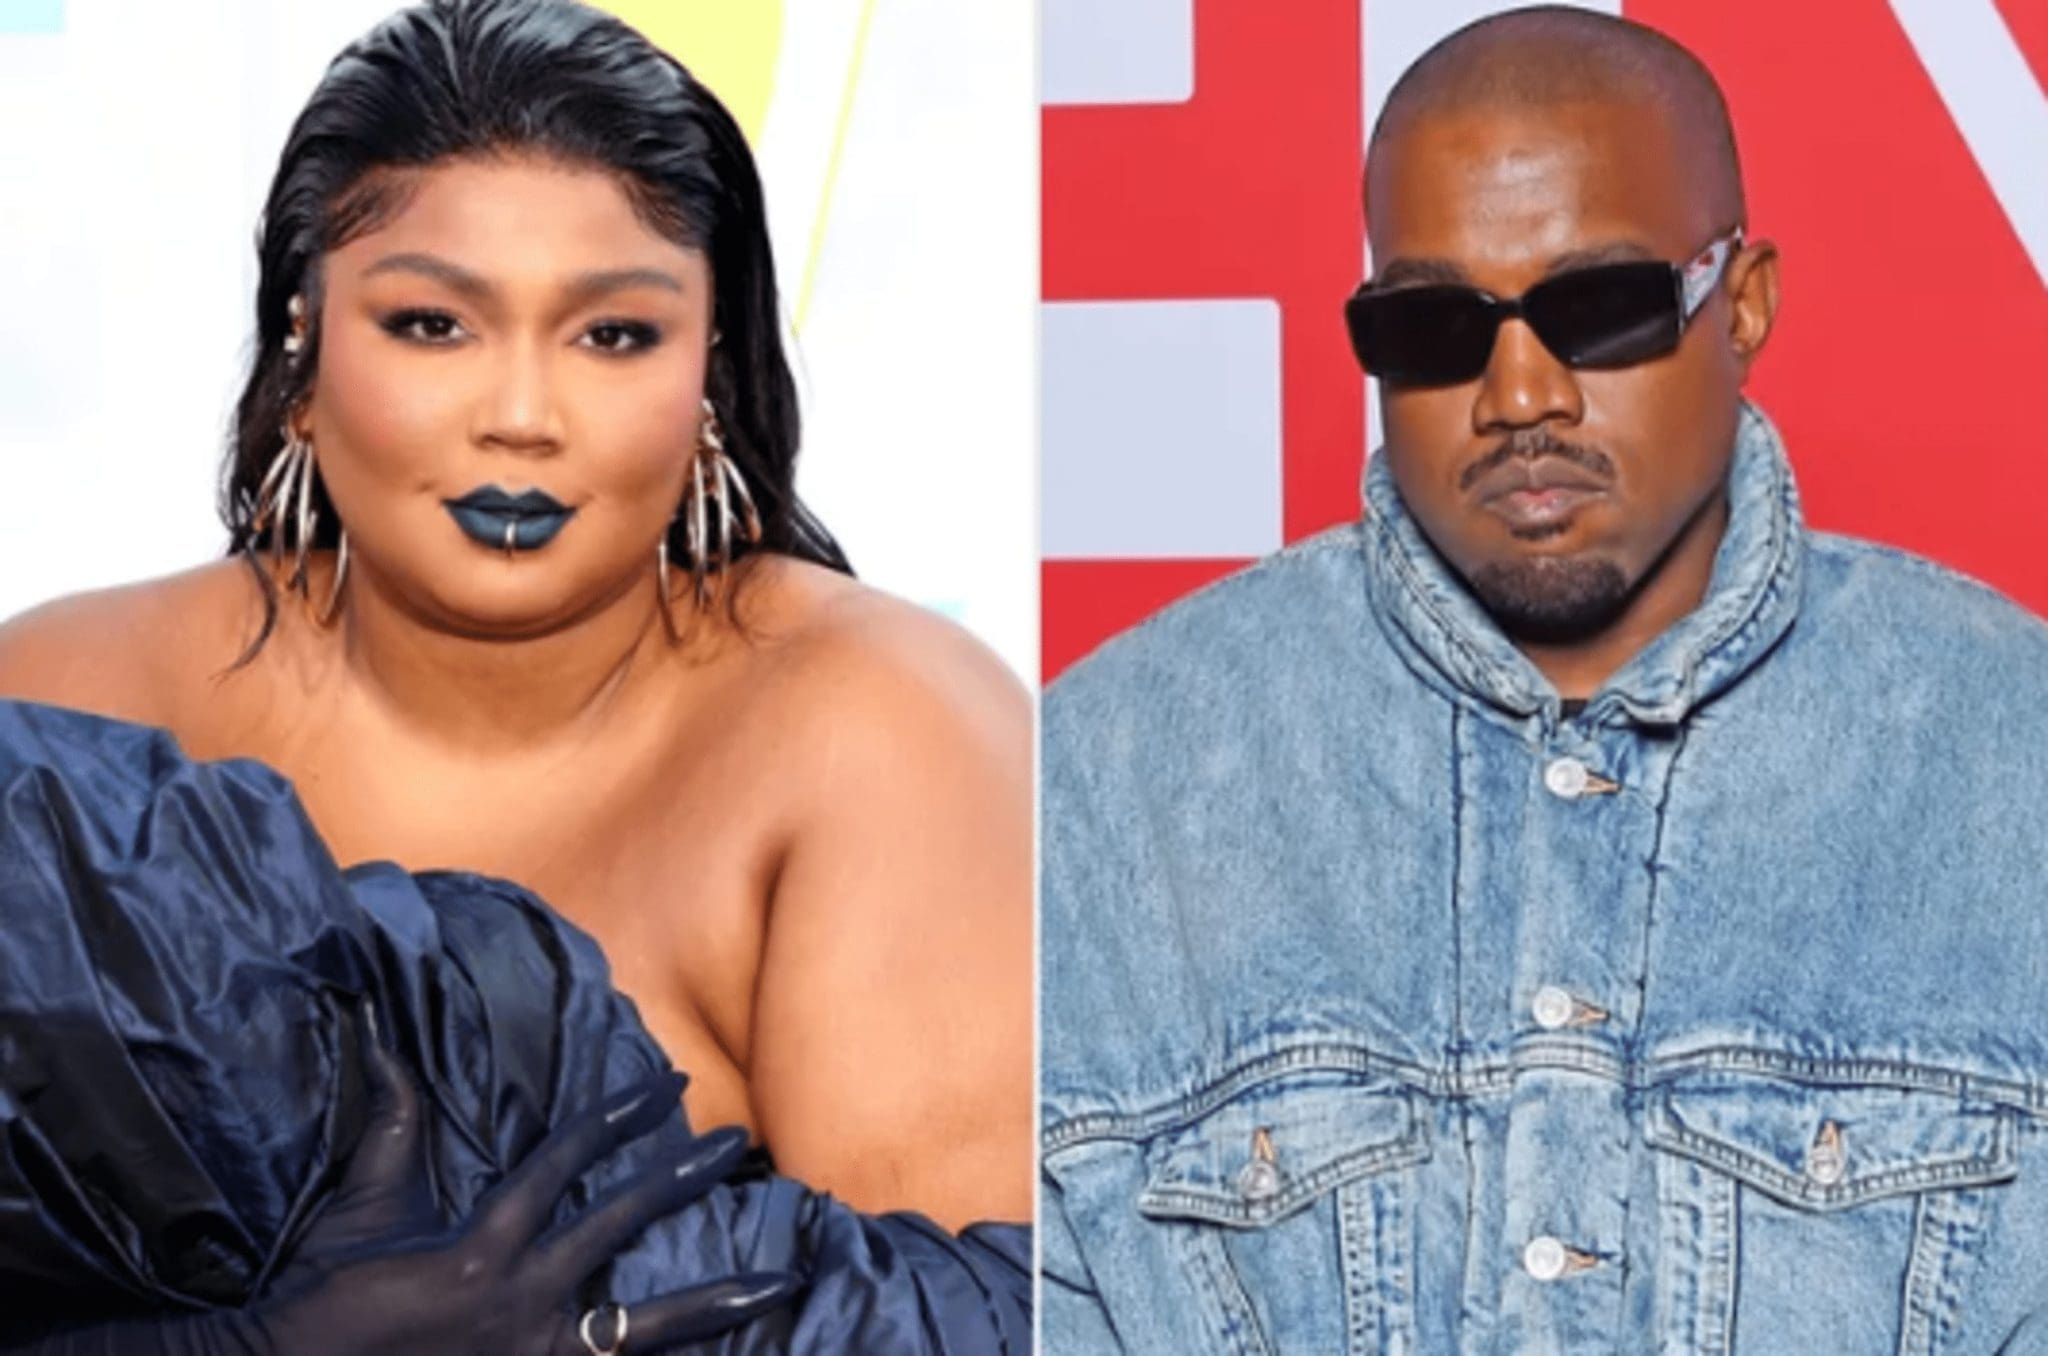 To respond to Kanye West's monstrous insult, Lizzo said, "I'm Minding My Fat, Black, Beautiful Business.